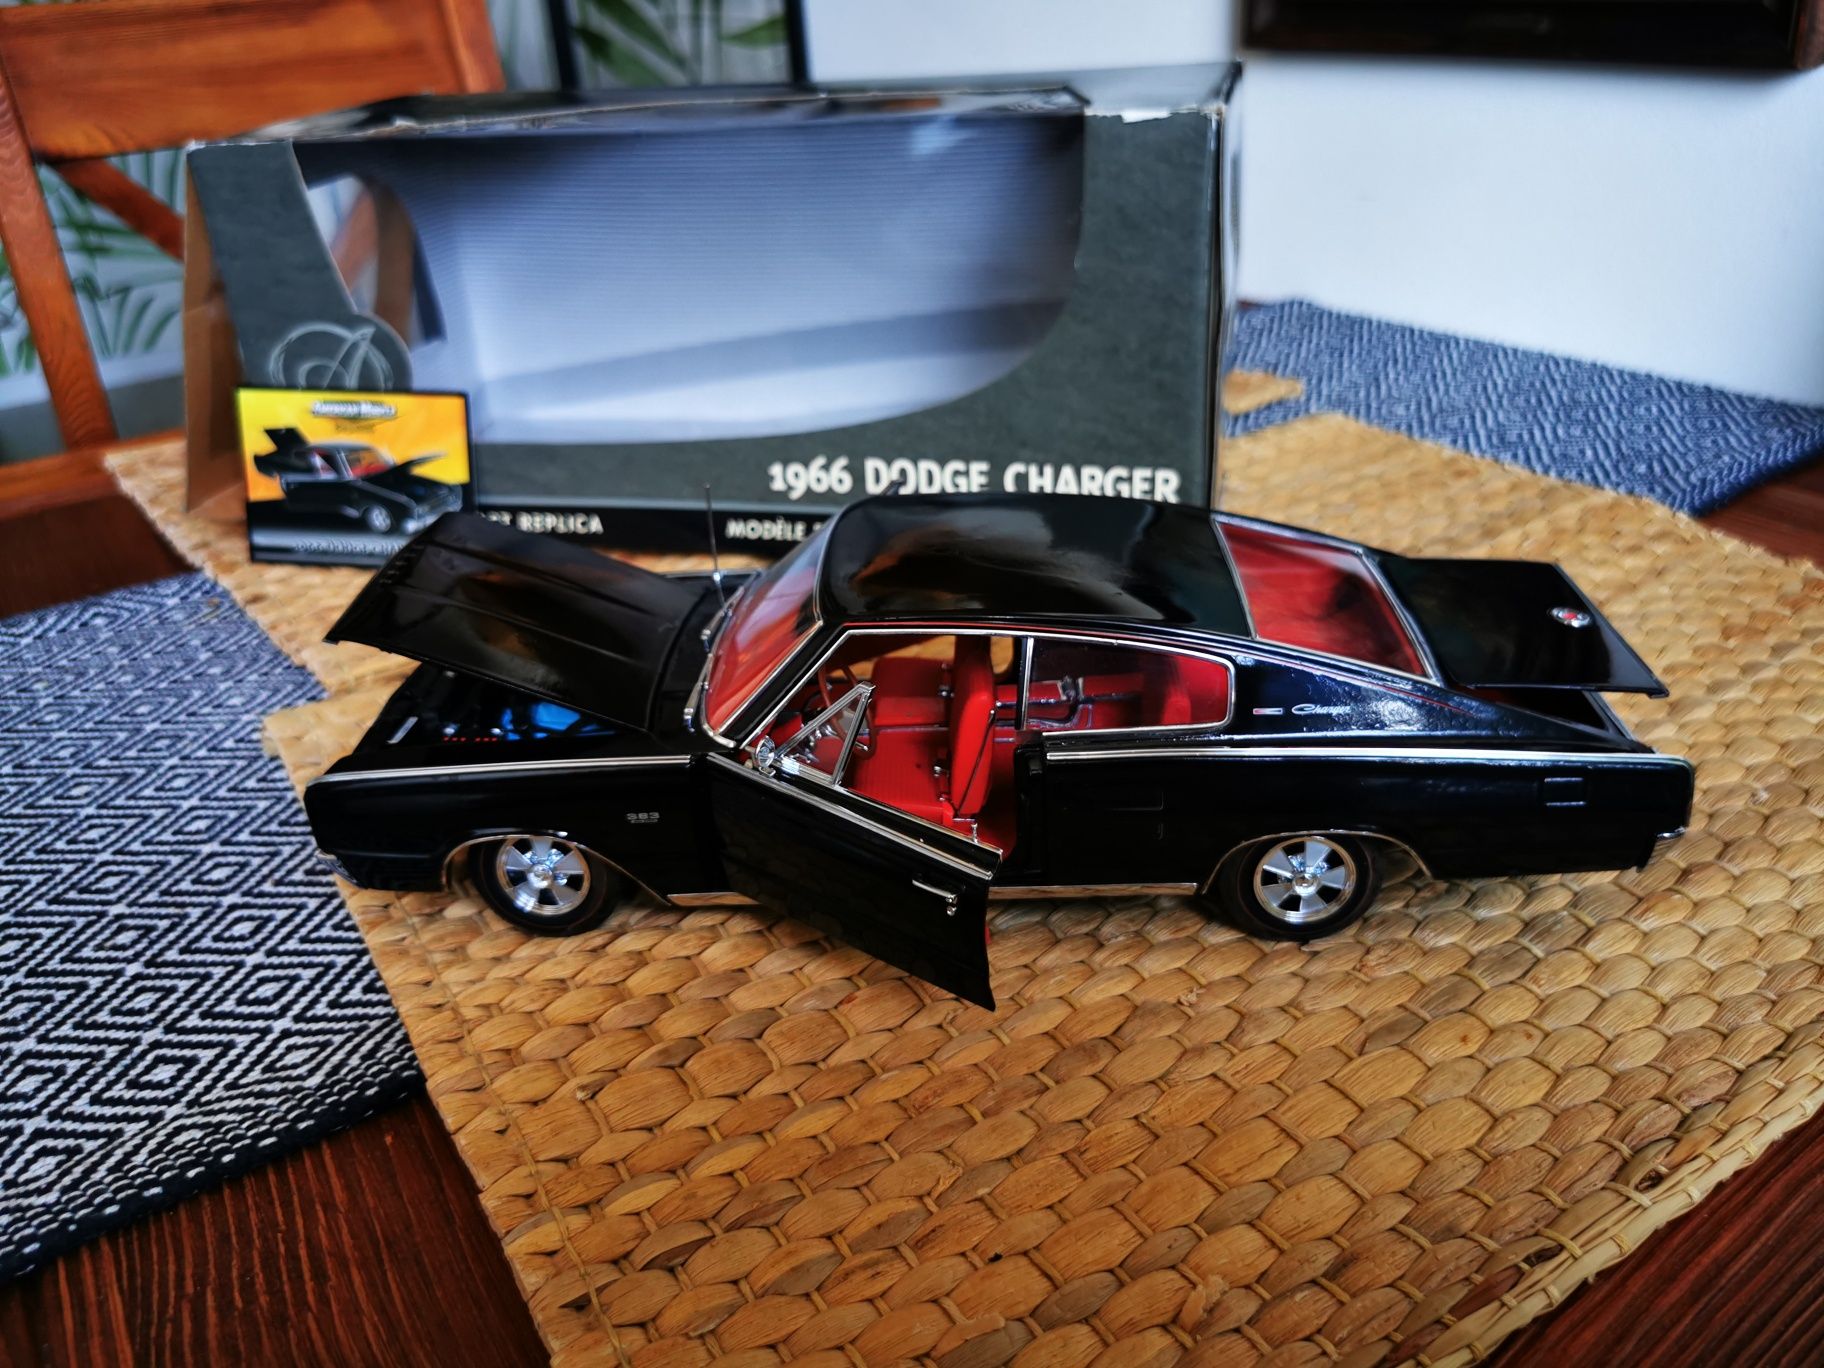 1:18 1966 Dodge Charger